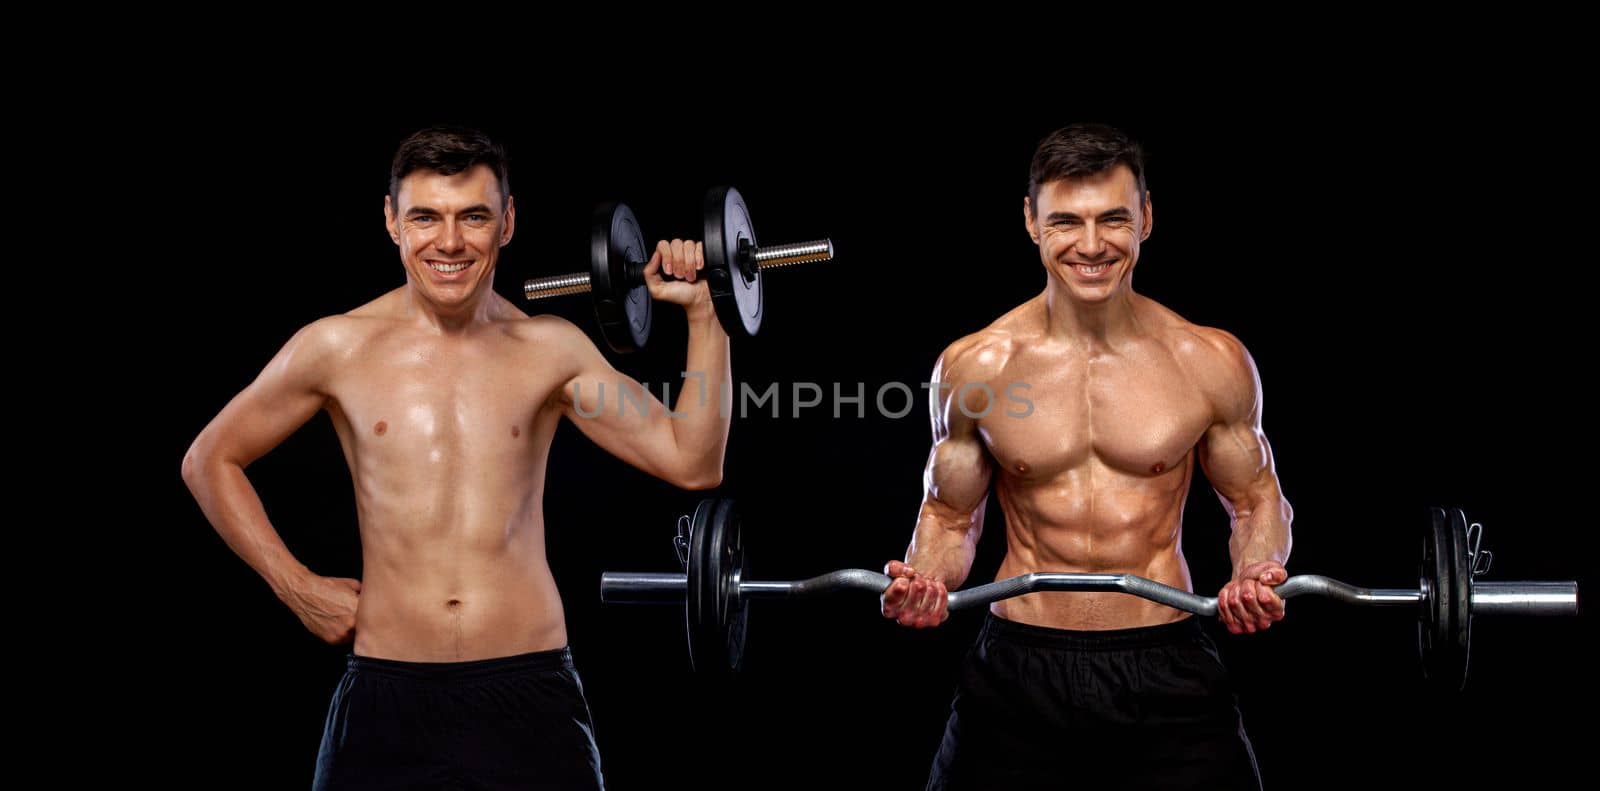 Athlete bodybuilder. Before - after coronavirus self isolation. Strong muscular athletic man pumping up muscles with barbell on black background. Workout bodybuilding concept. by MikeOrlov